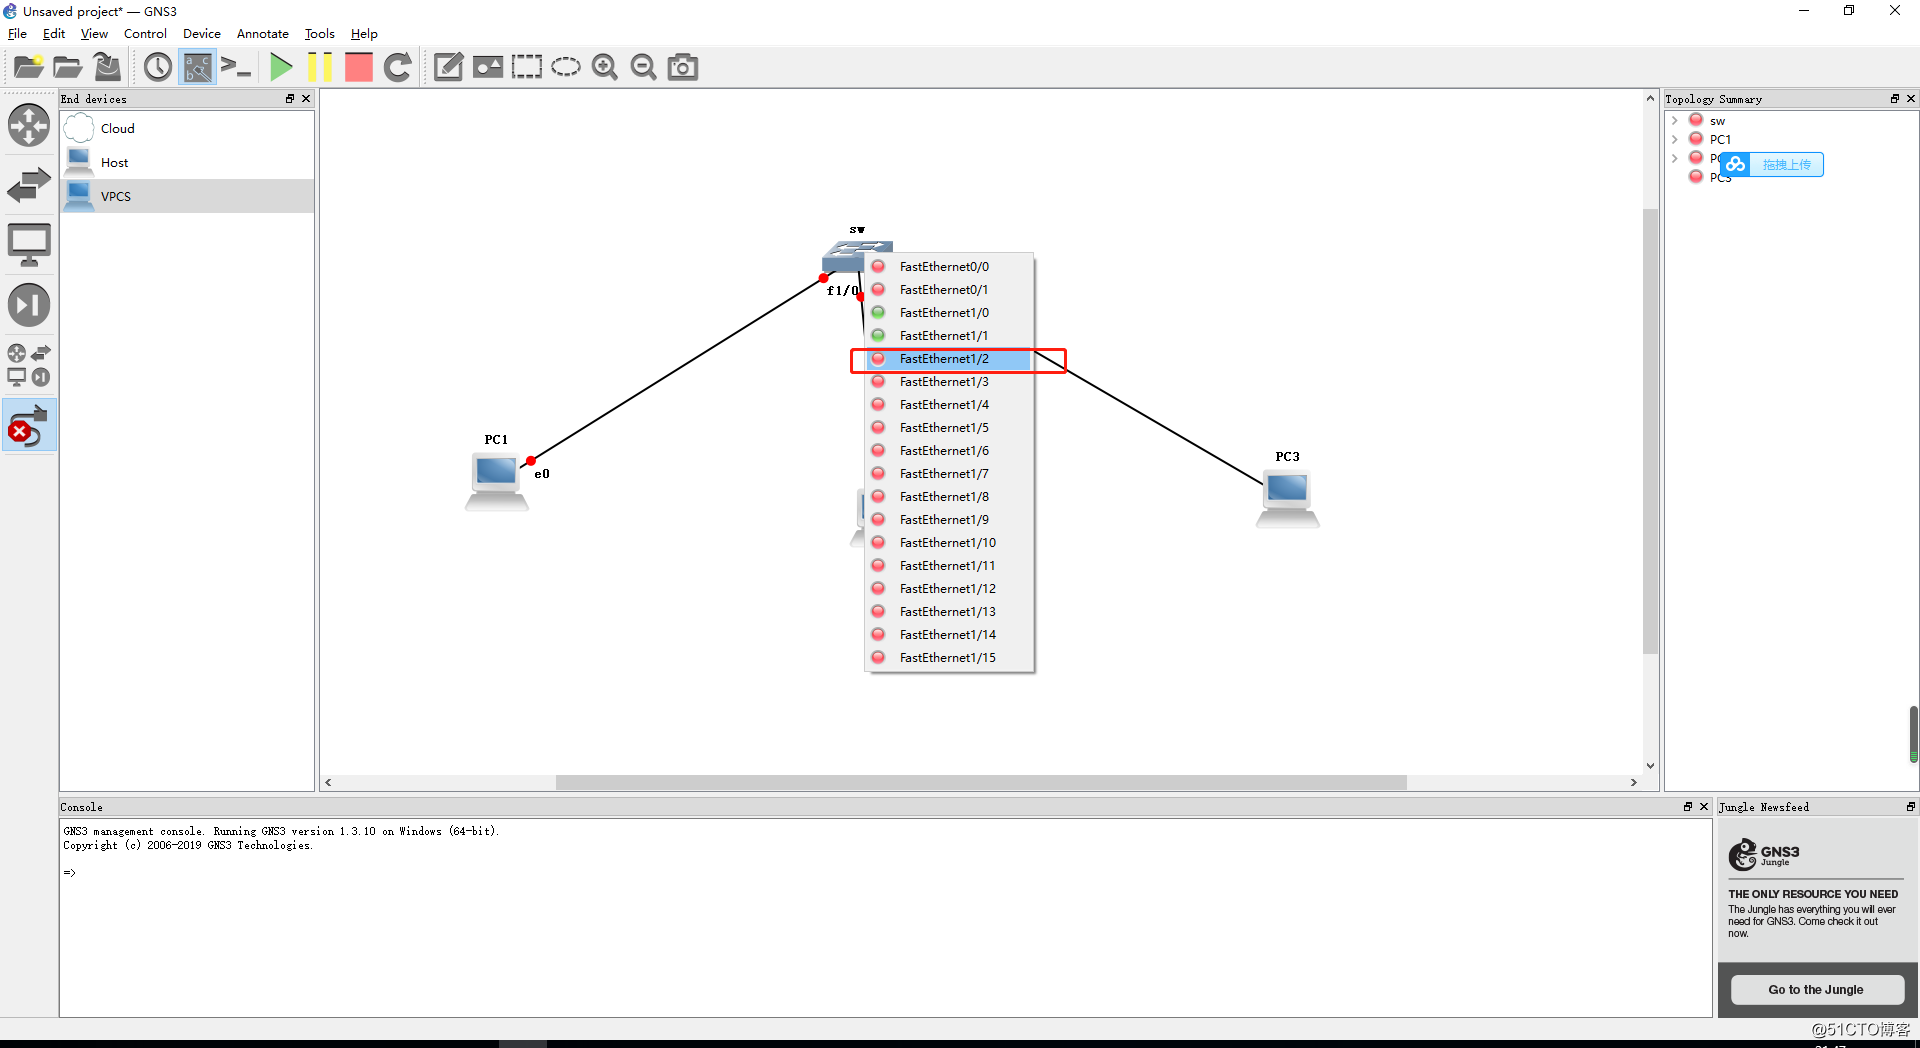 Experimental details of operation of the VLAN configuration